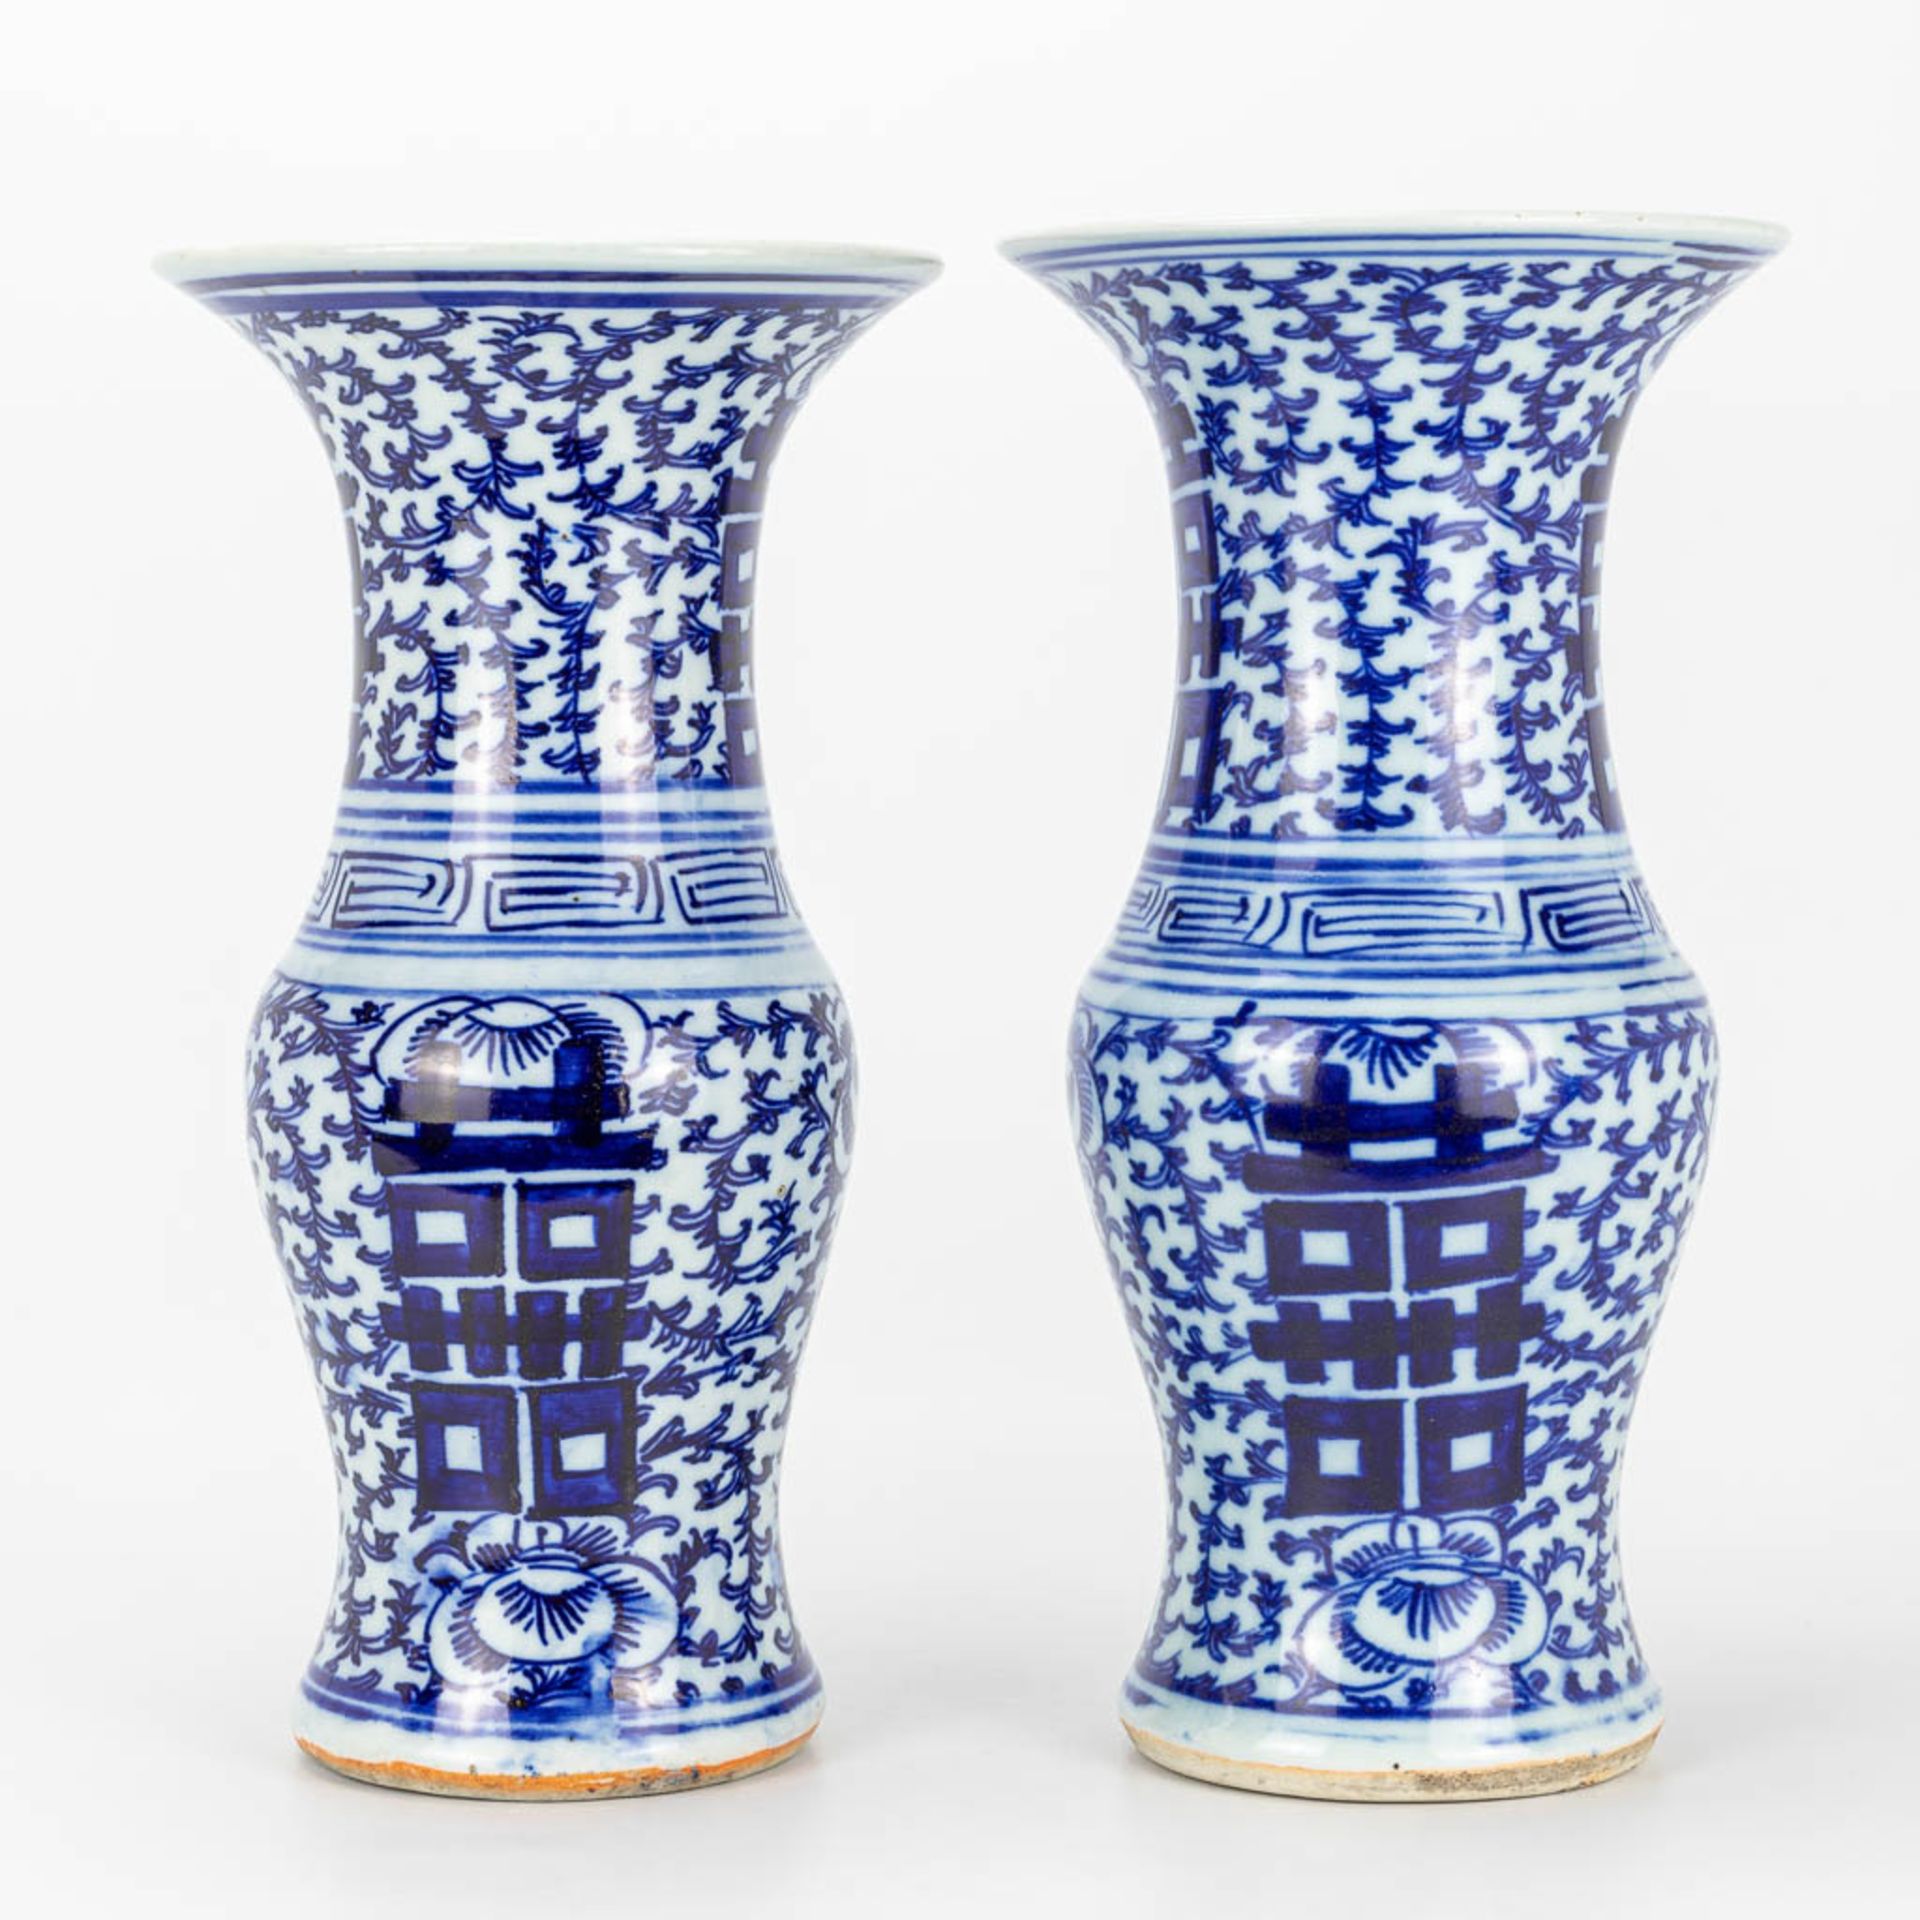 A pair of vases made of Chinese blue-white porcelain with 'Double Xi-sign' symbols of happiness.